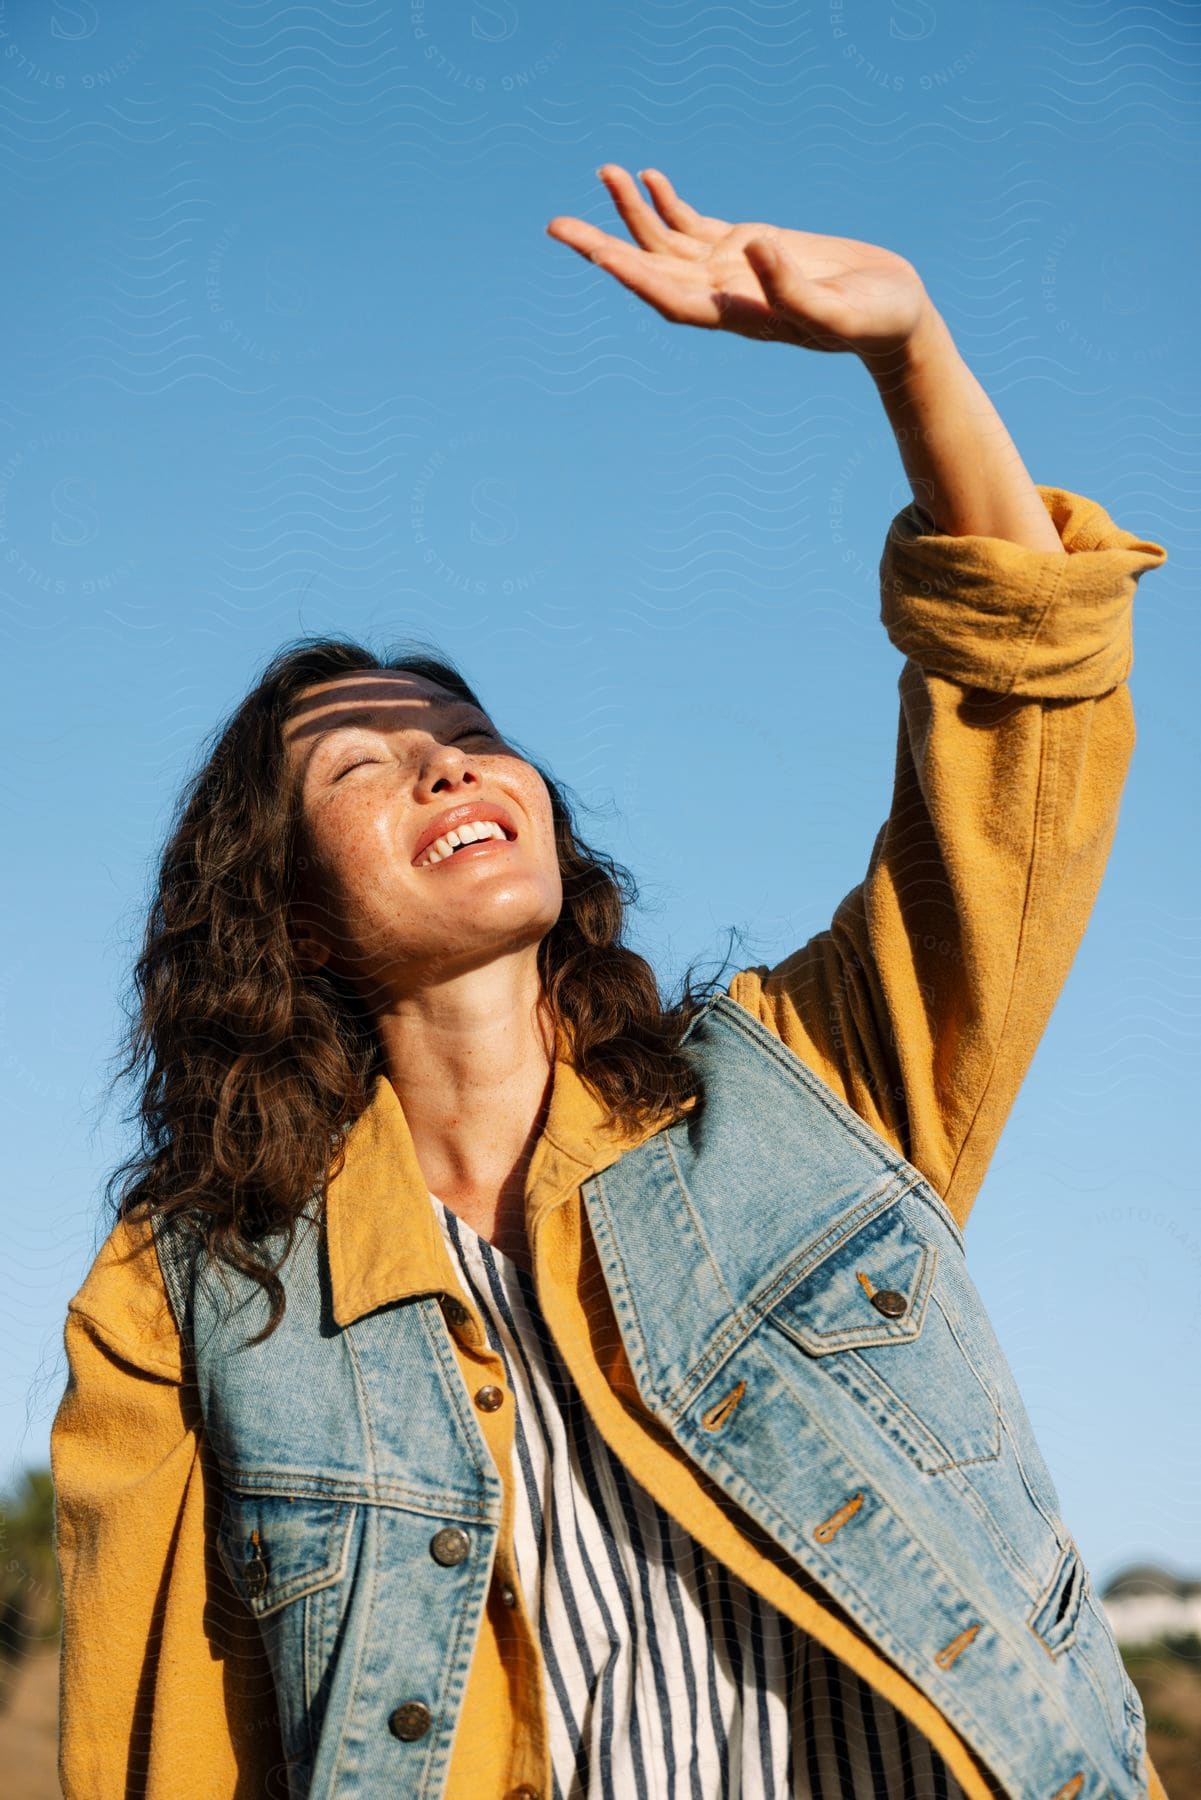 A woman in a coat laughing and raising her finger triumphantly against a sky backdrop